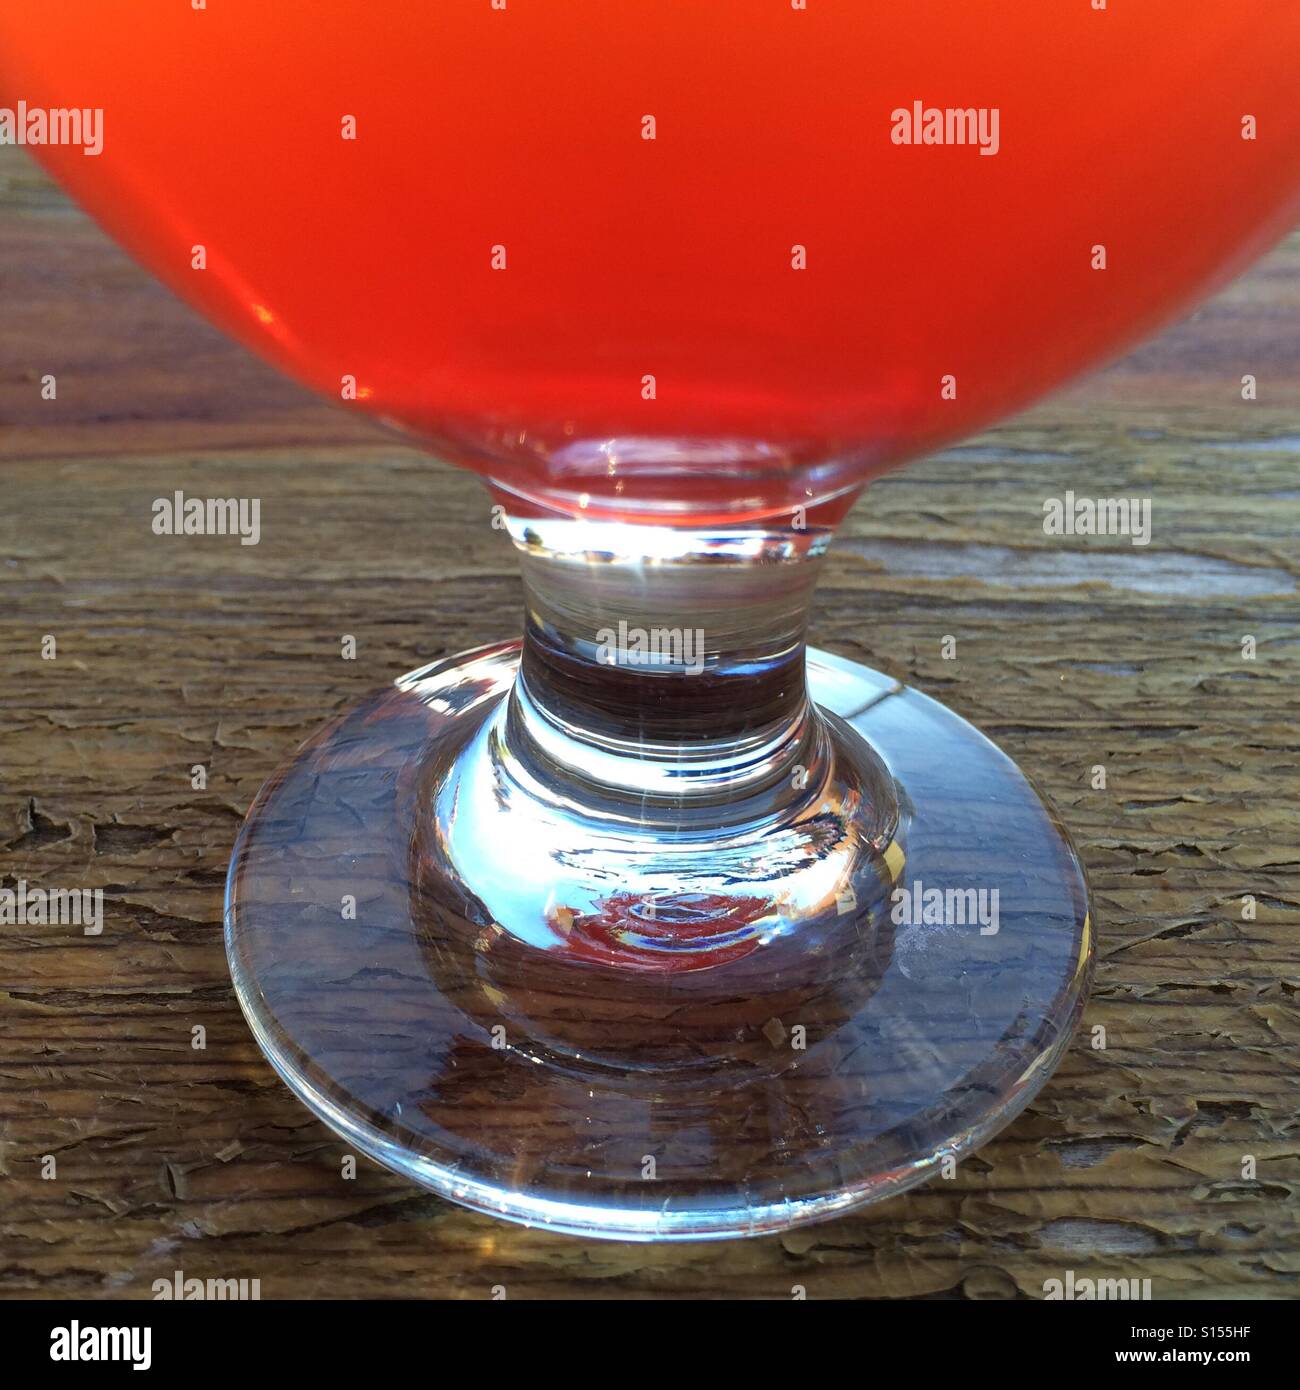 Stem of a glass of beer. Stock Photo